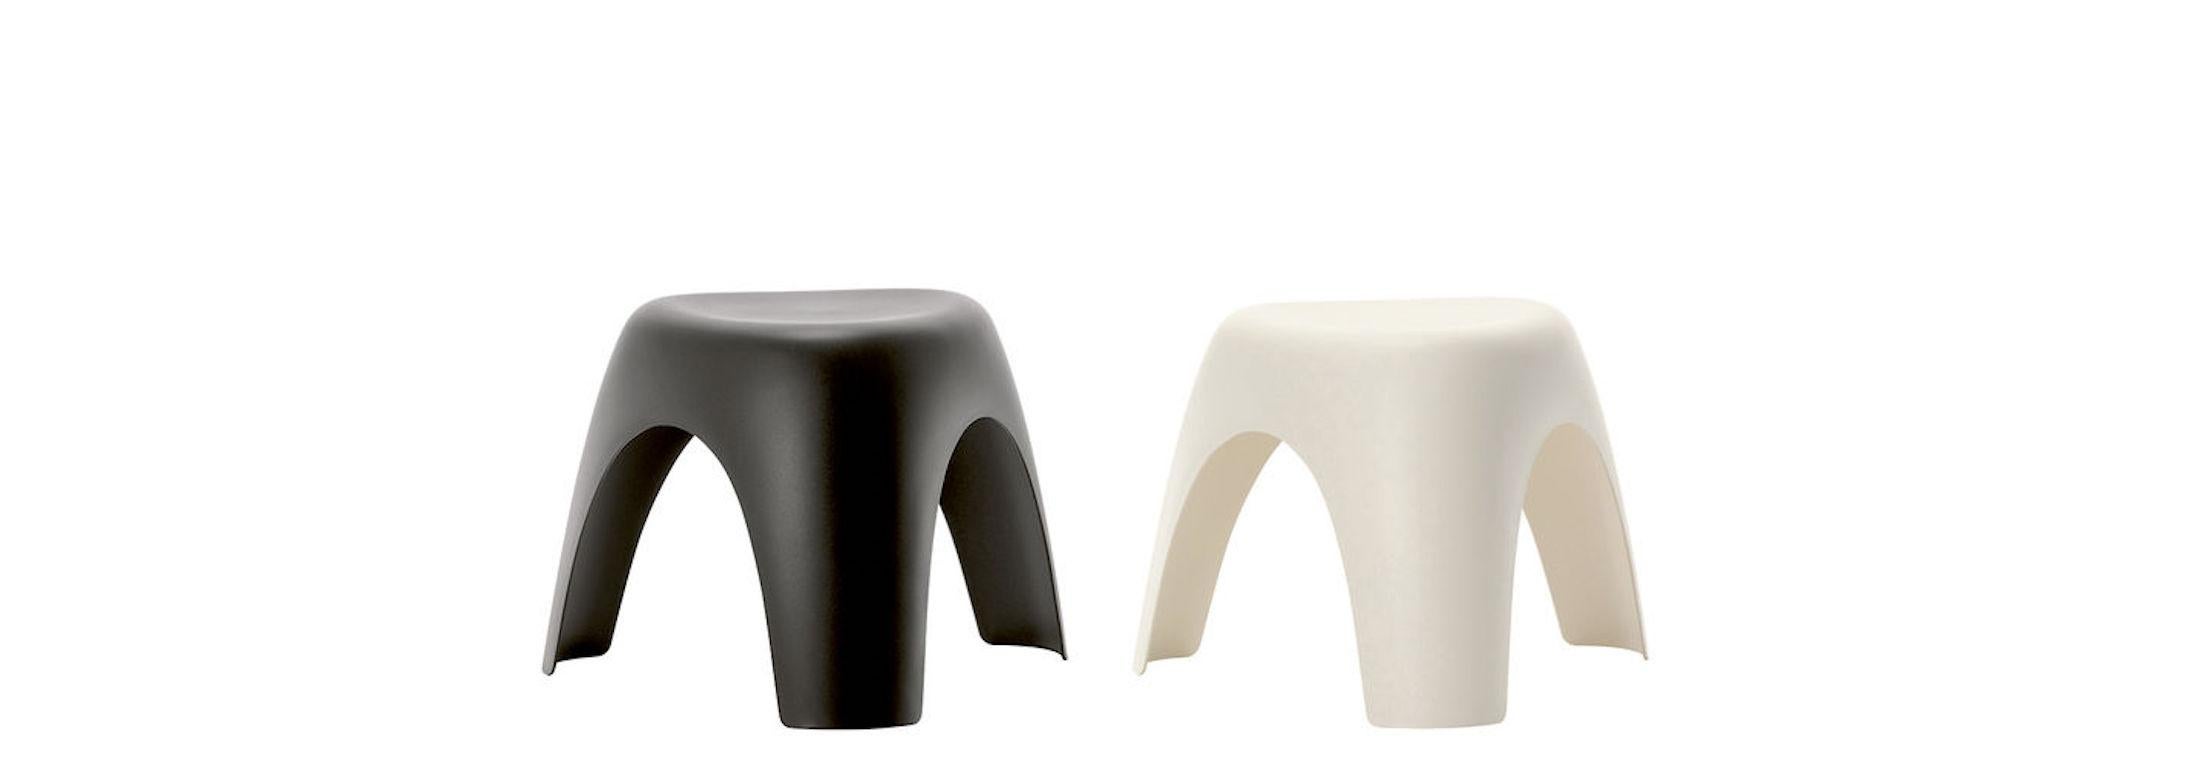 These items are only available in the United States.

The Elephant Stool is one of the most famous examples of Japanese post-war design. Its clear form and functionality are as compelling today as ever. Suited for indoor spaces as well as